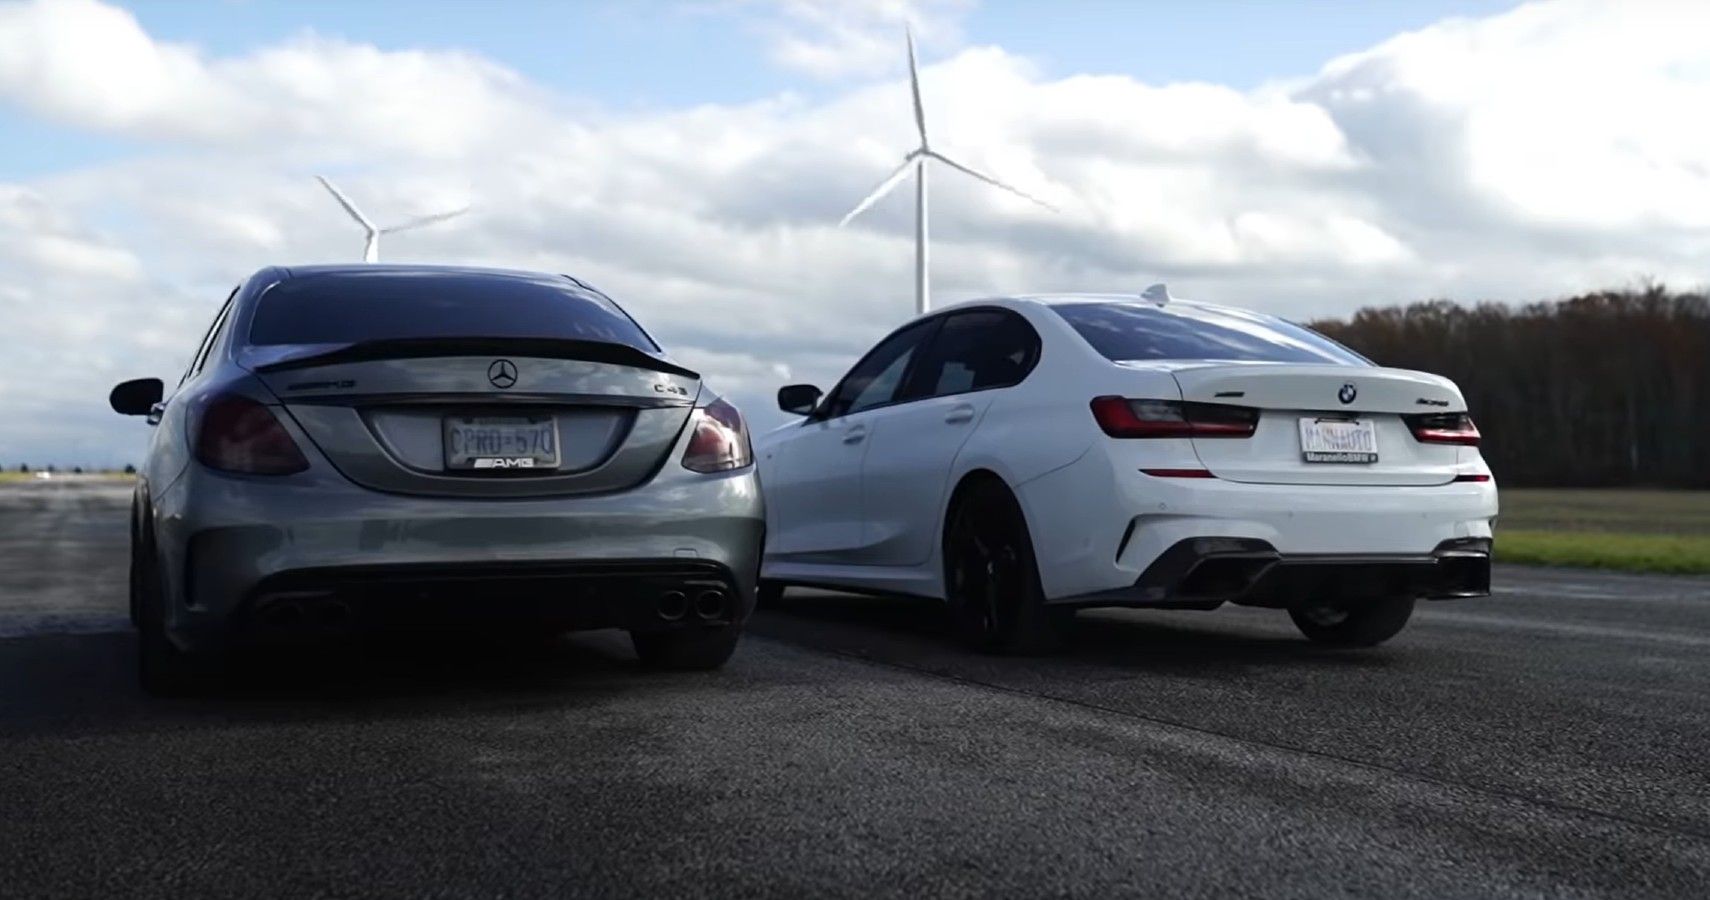 Tuned BMW and Mercedes racing